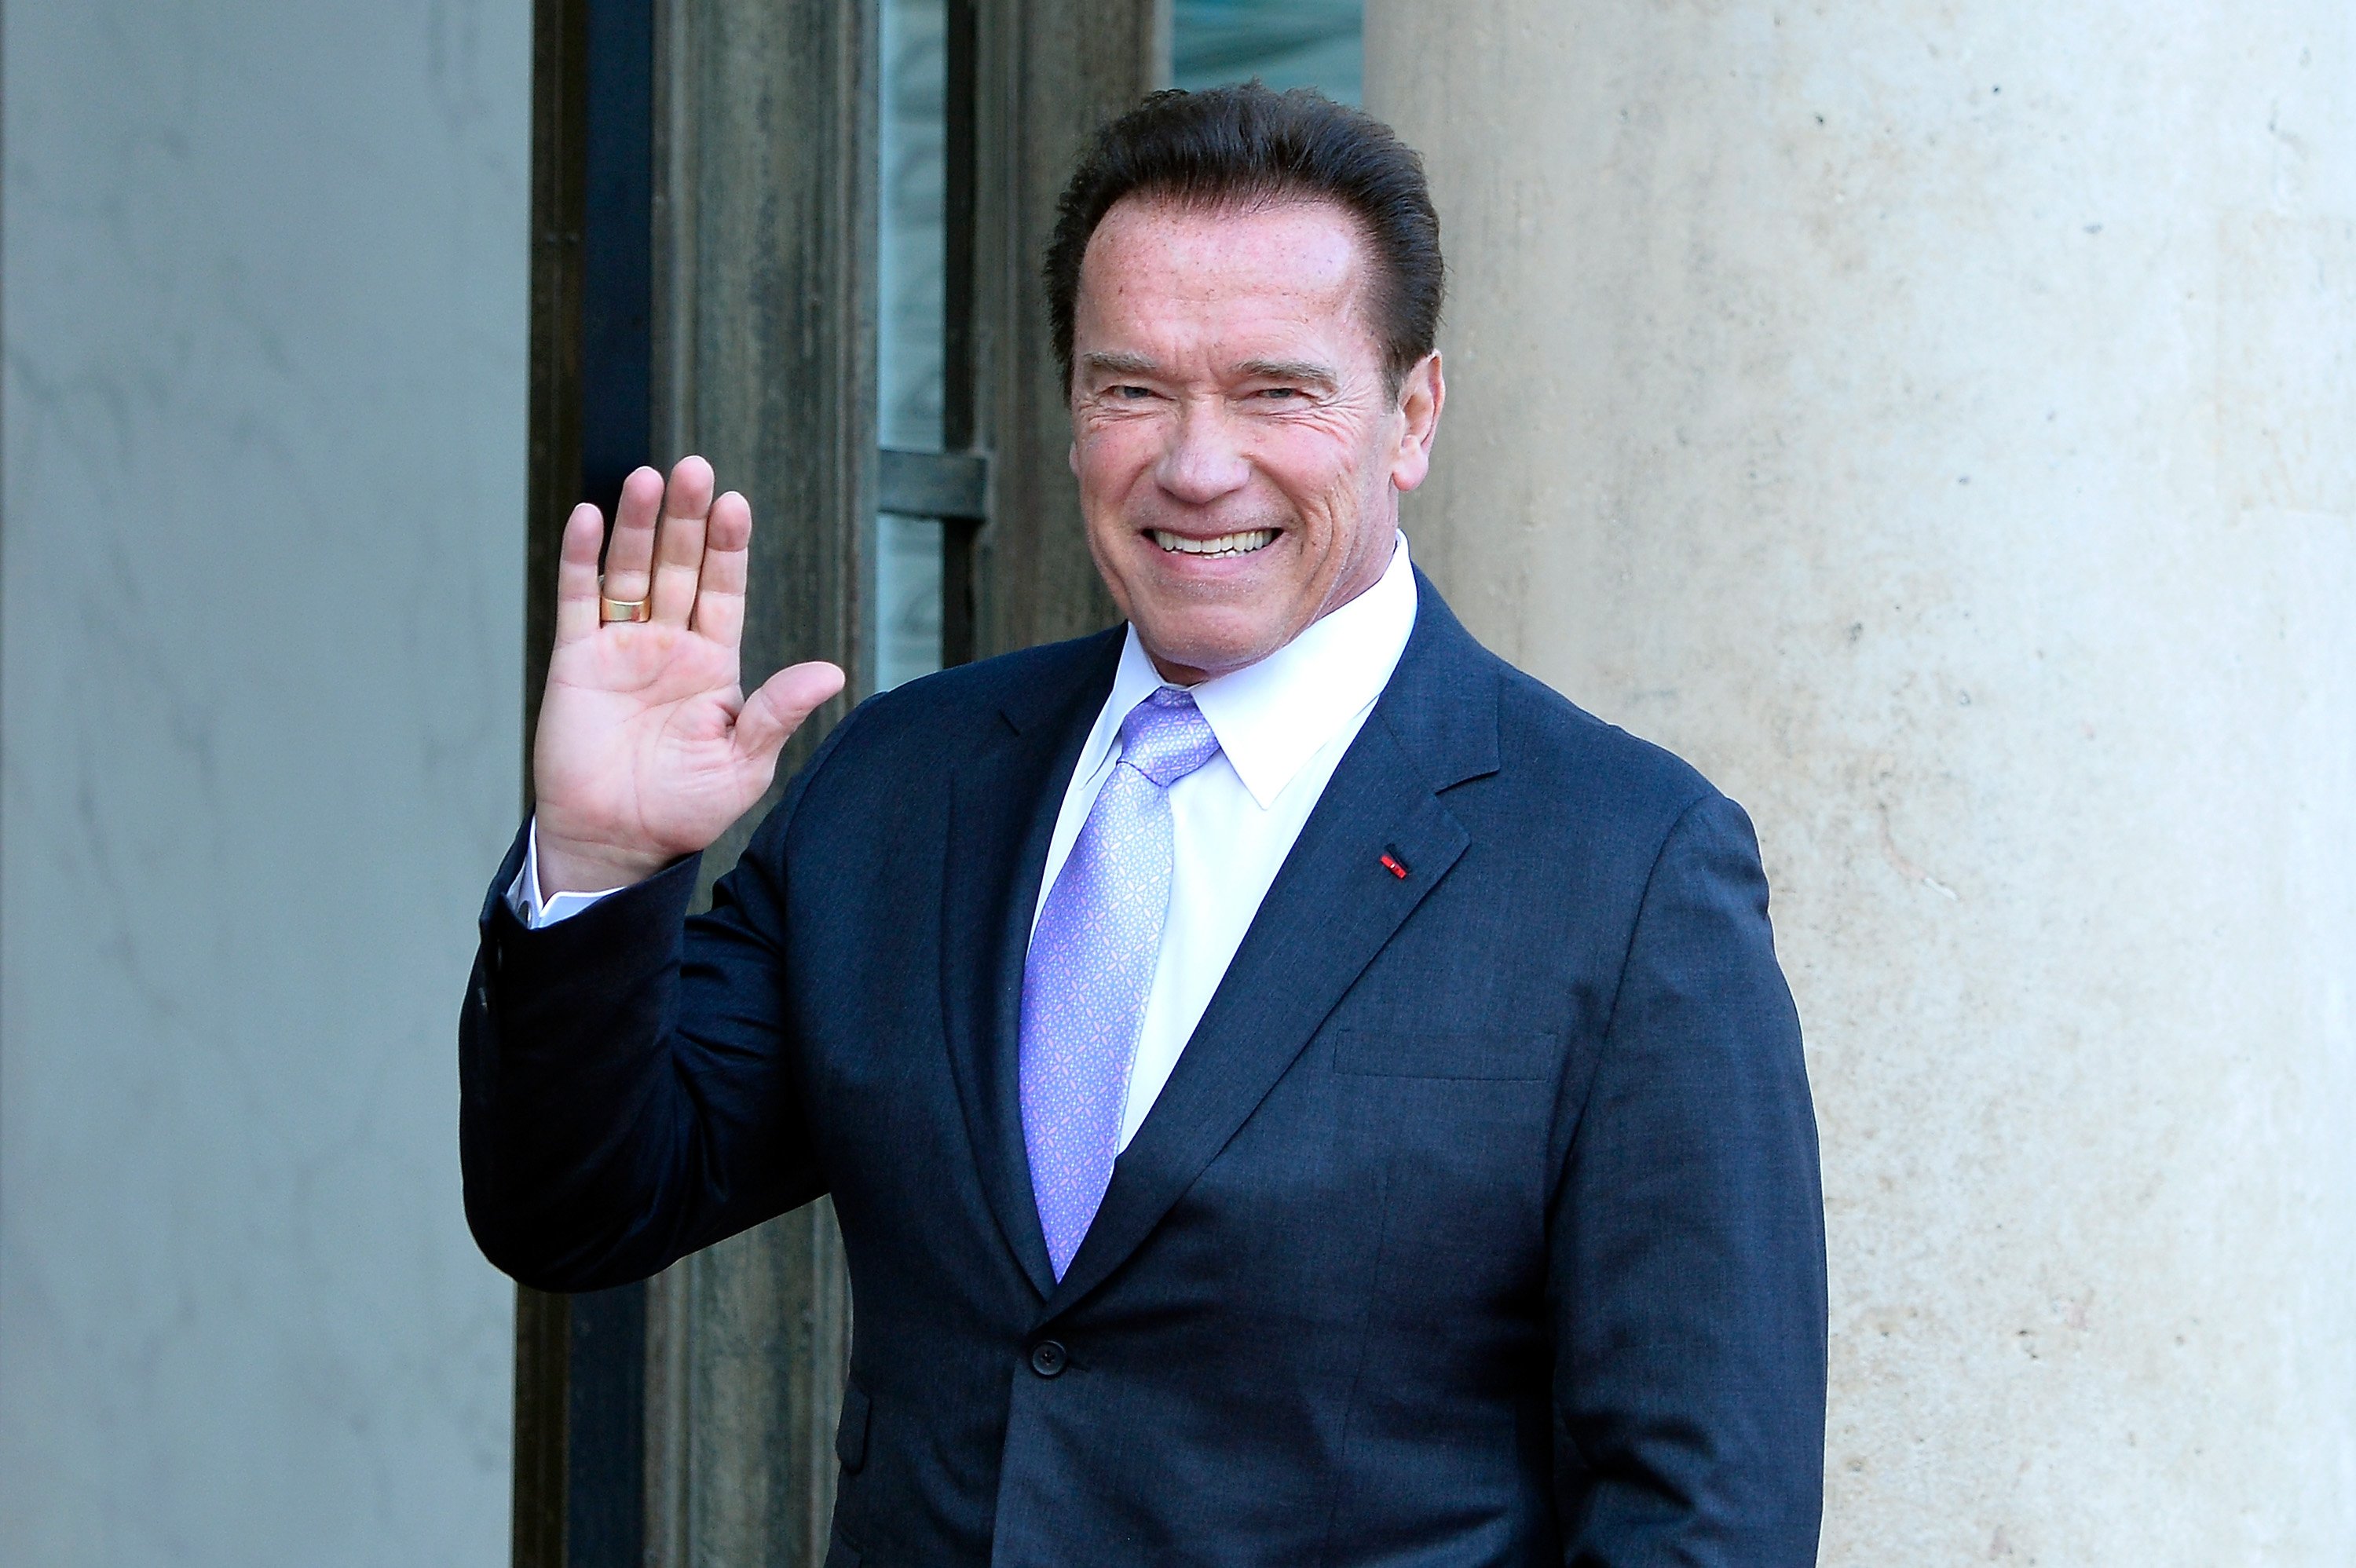 Arnold Schwarzenegger arrives for a meeting with French President Emmanuel Macron in 2017. | Source: Getty Images